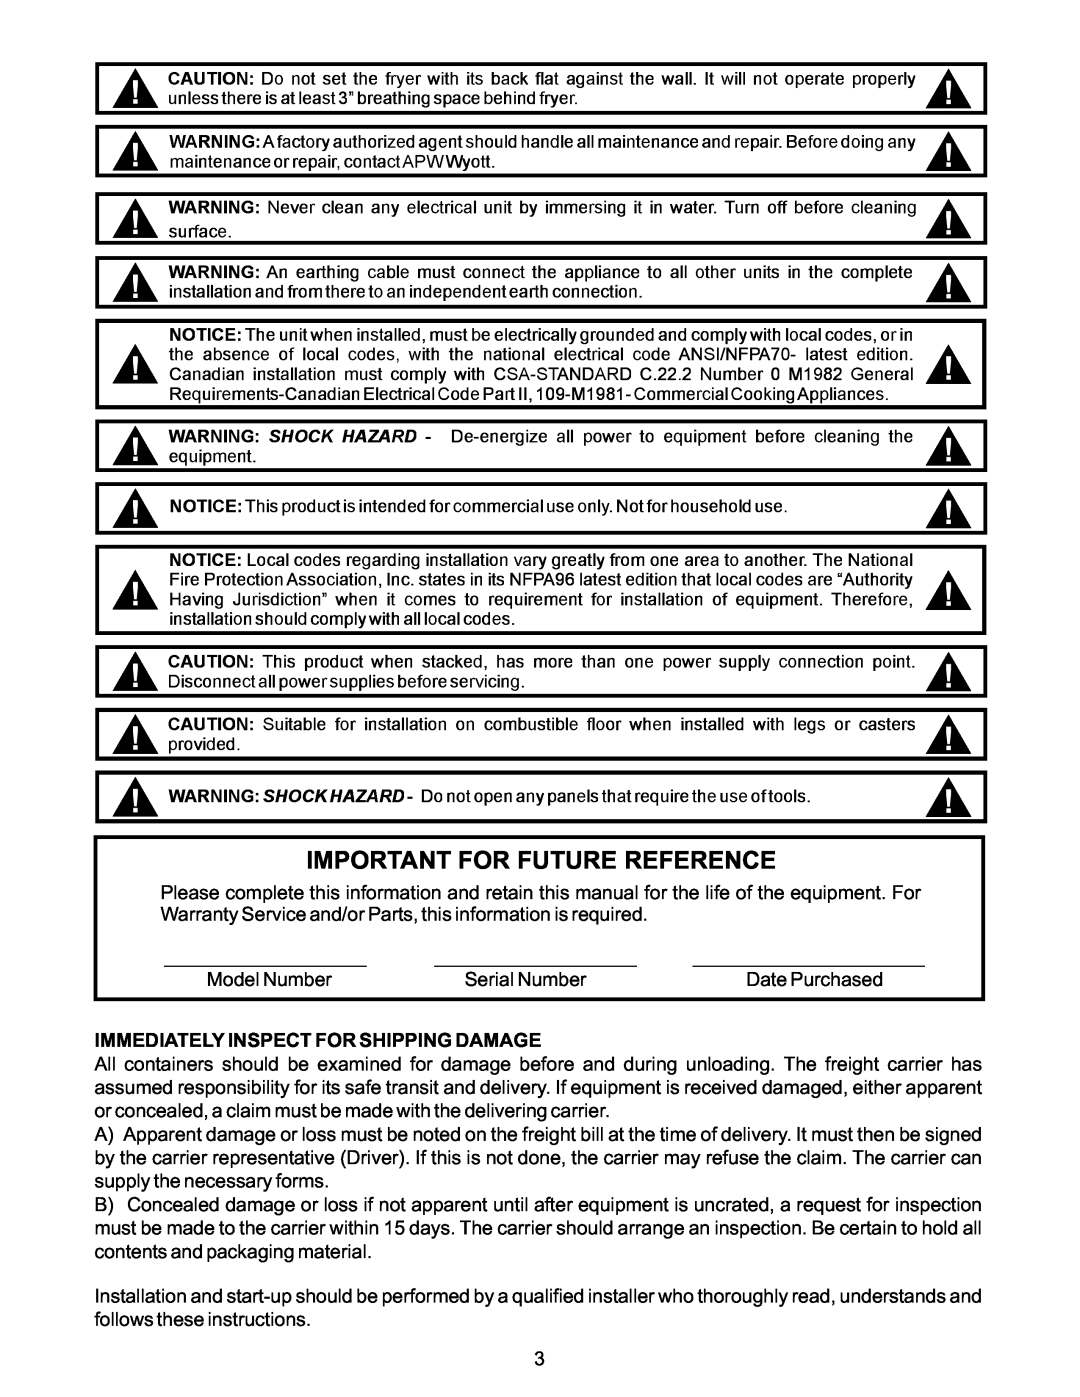 APW Wyott EF-30NTC, EF-15N operating instructions Important For Future Reference, Immediately Inspect For Shipping Damage 